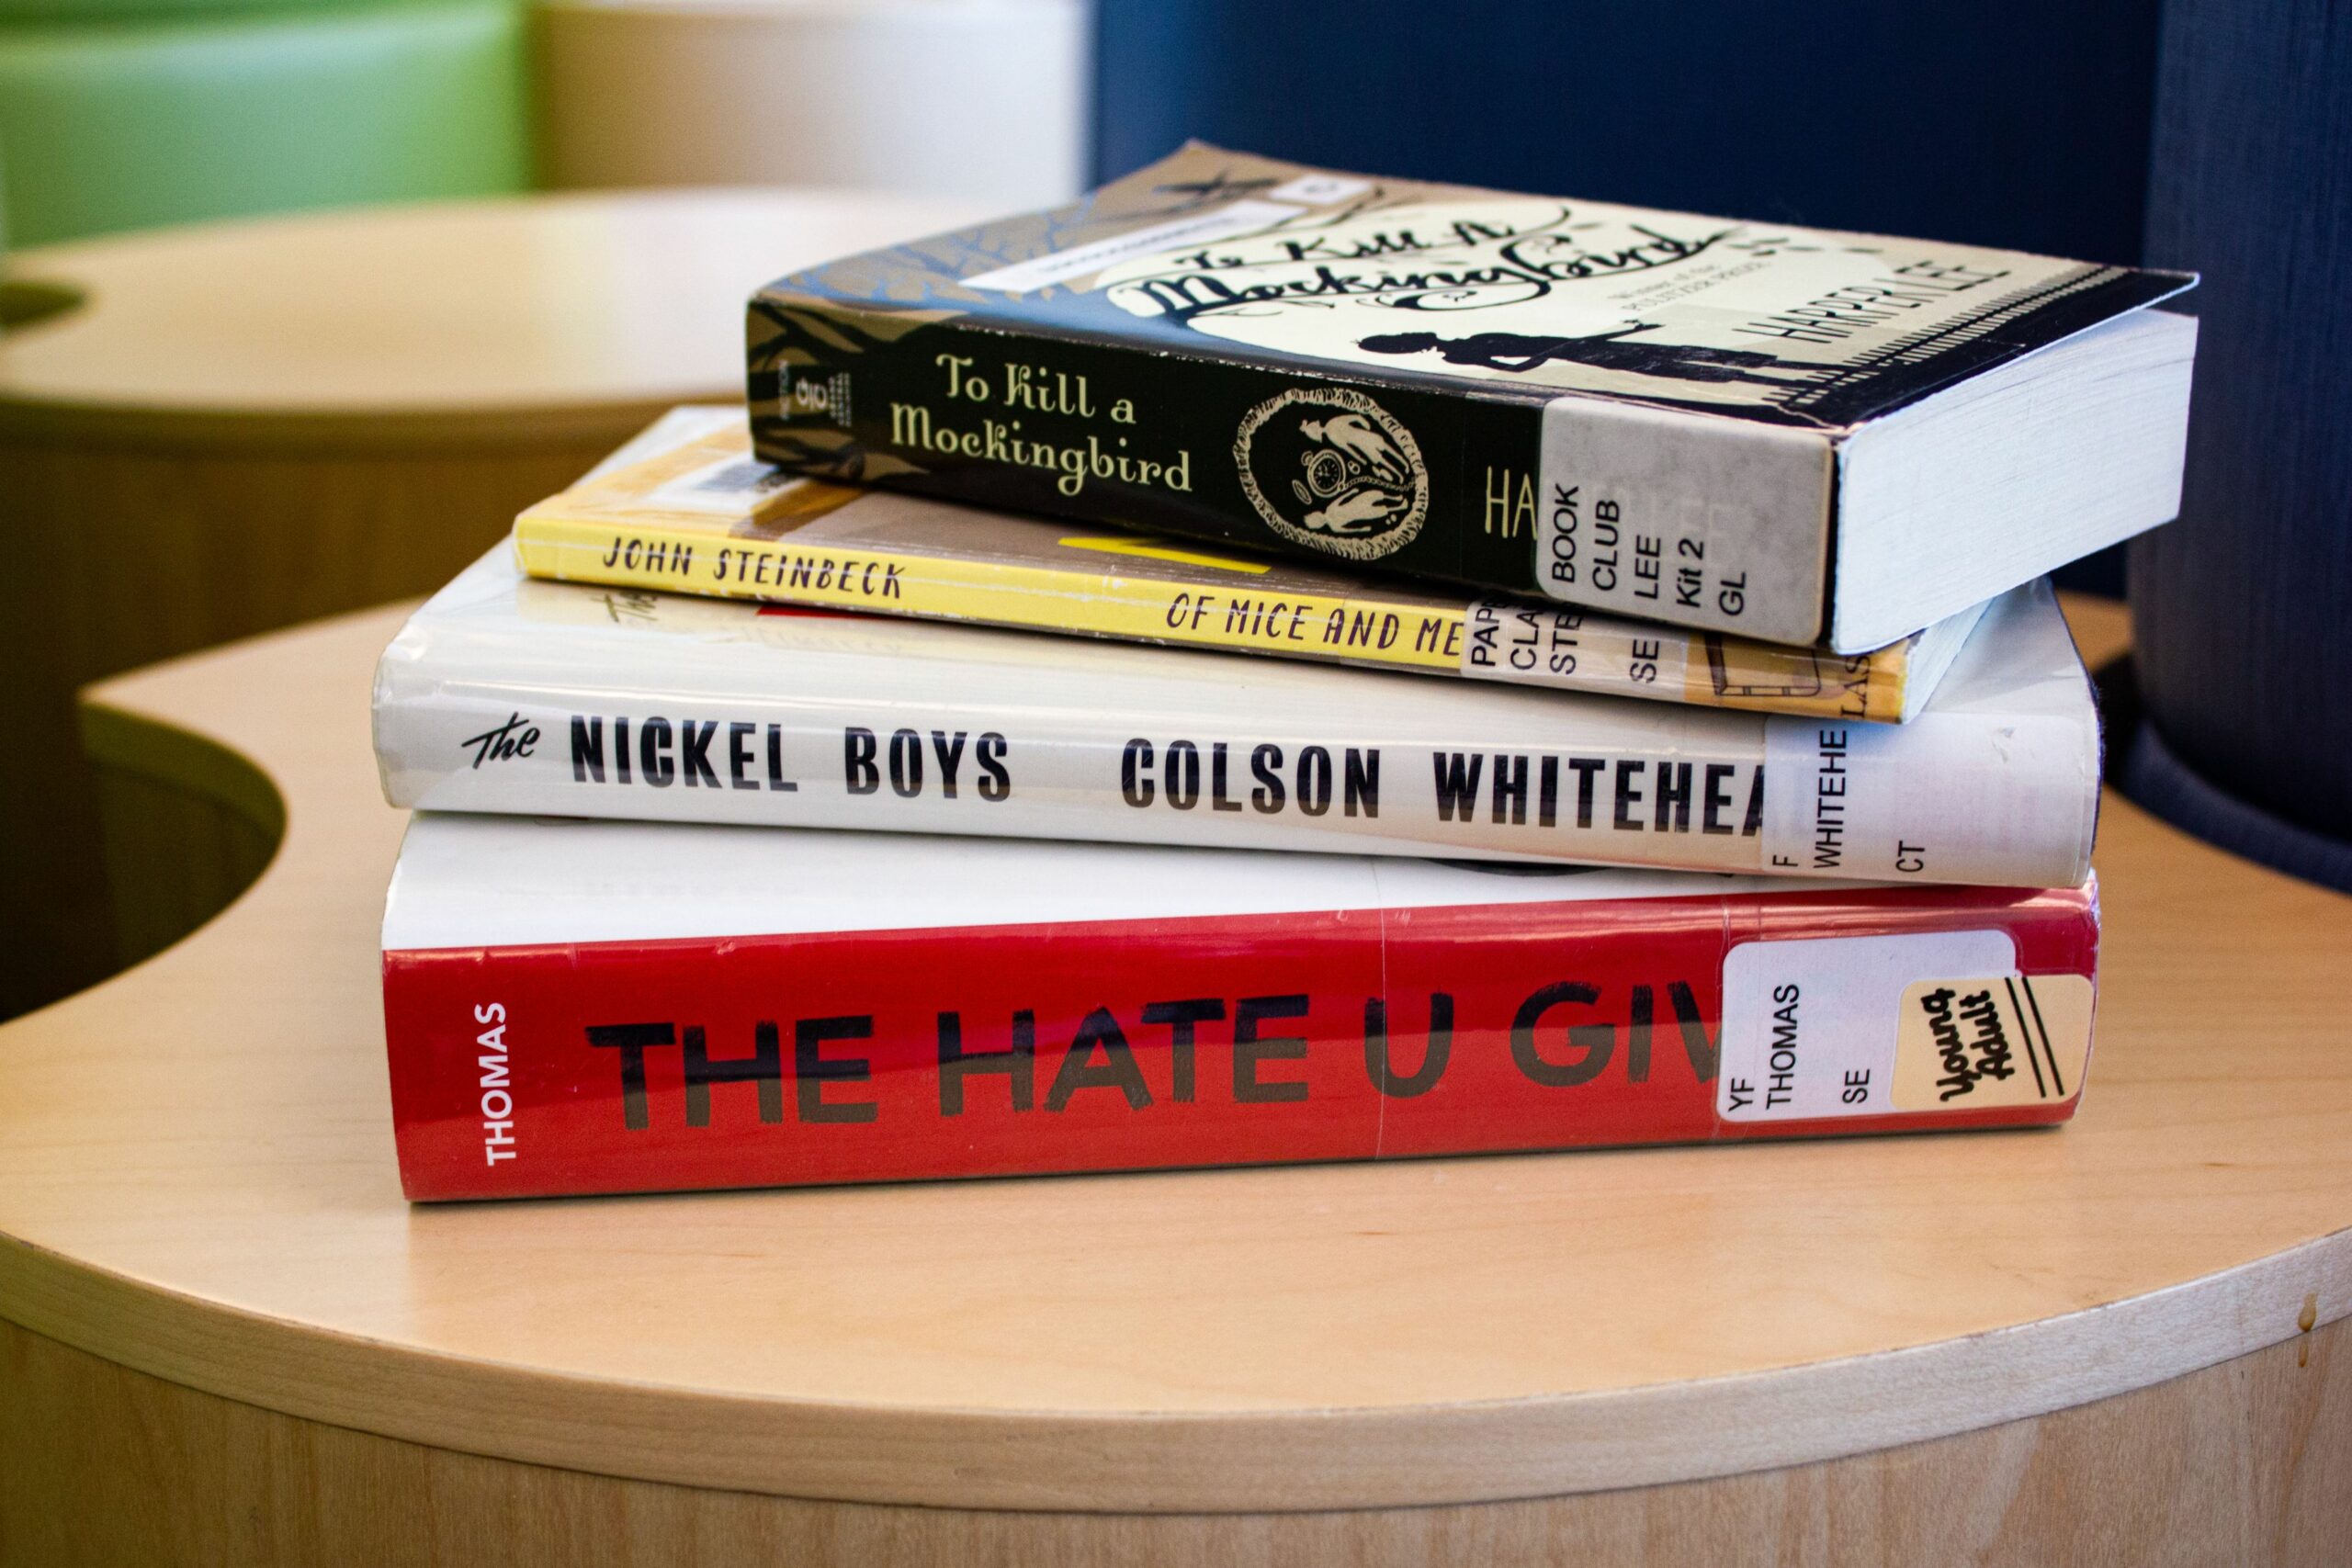 A stack of books, including To Kill a Mockingbird, The Hate U Give, Of Mice and Men, and The Nickel Boys